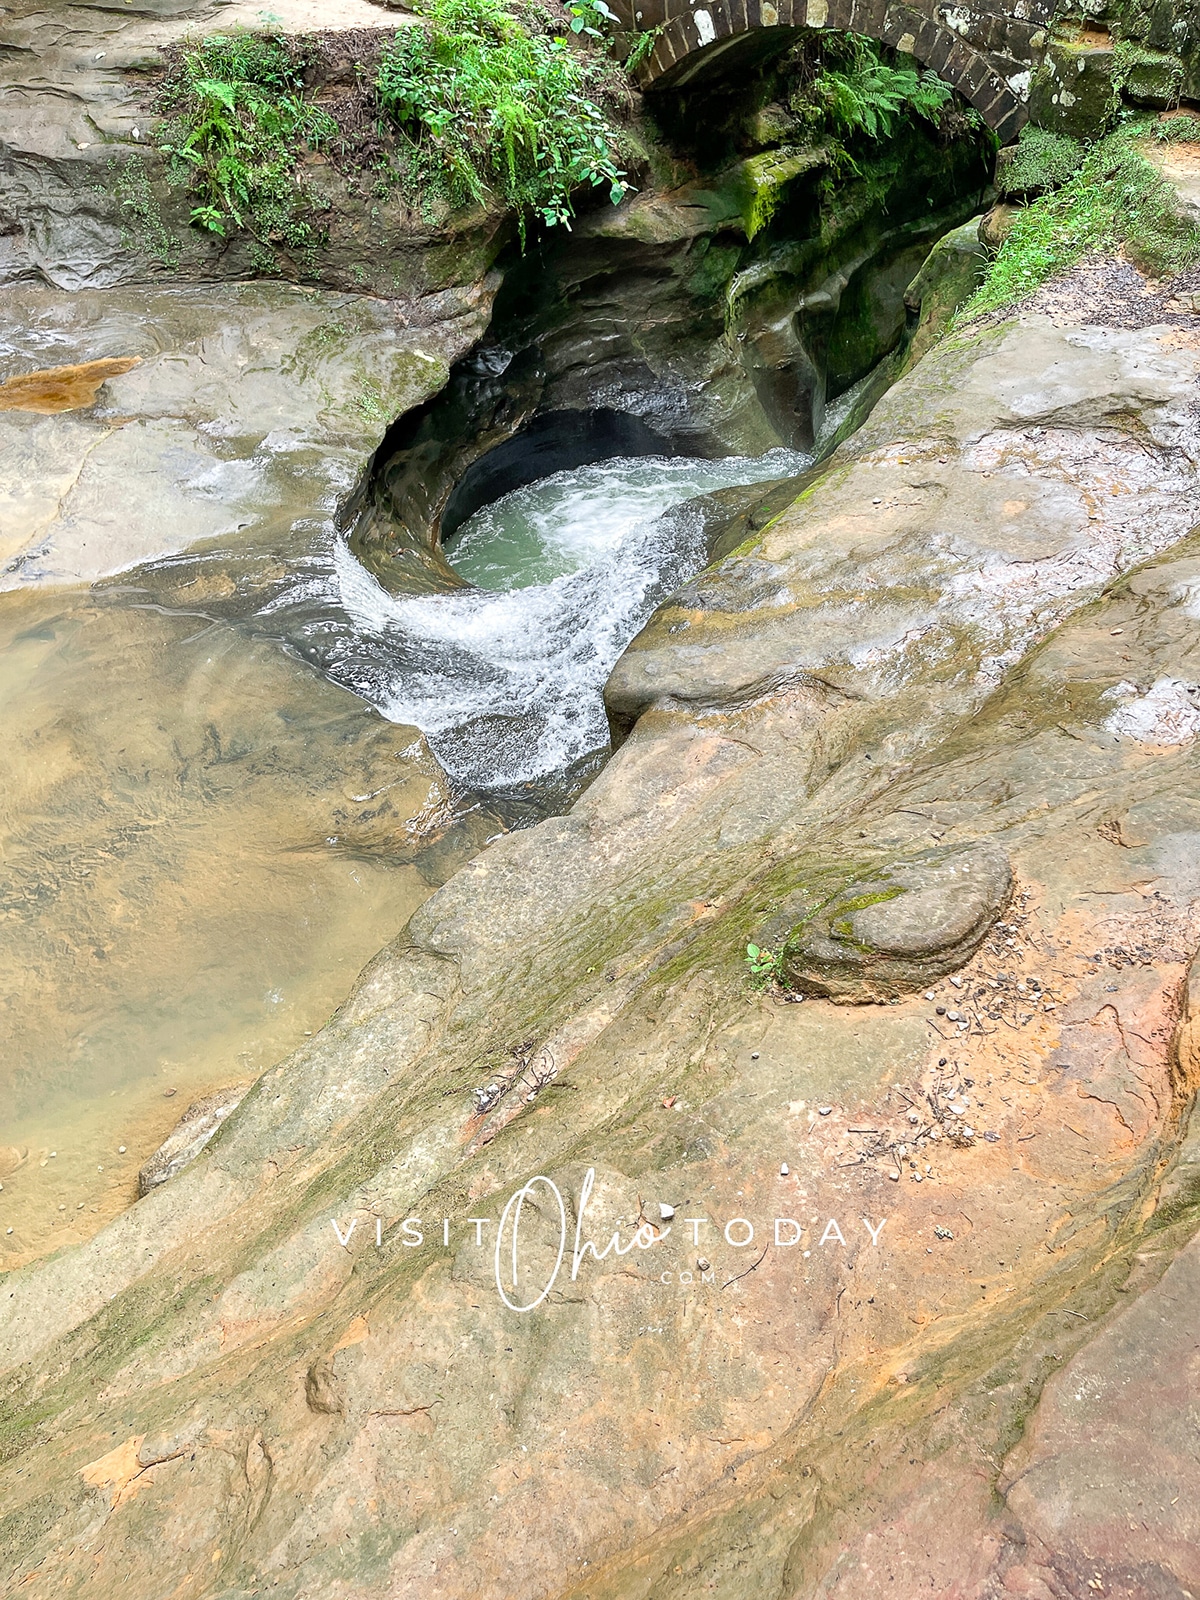 vertical photo of Devil's Bathtub Hocking Hills showing the water swirling into the pool Photo credit: Cindy Gordon of VisitOhioToday.com